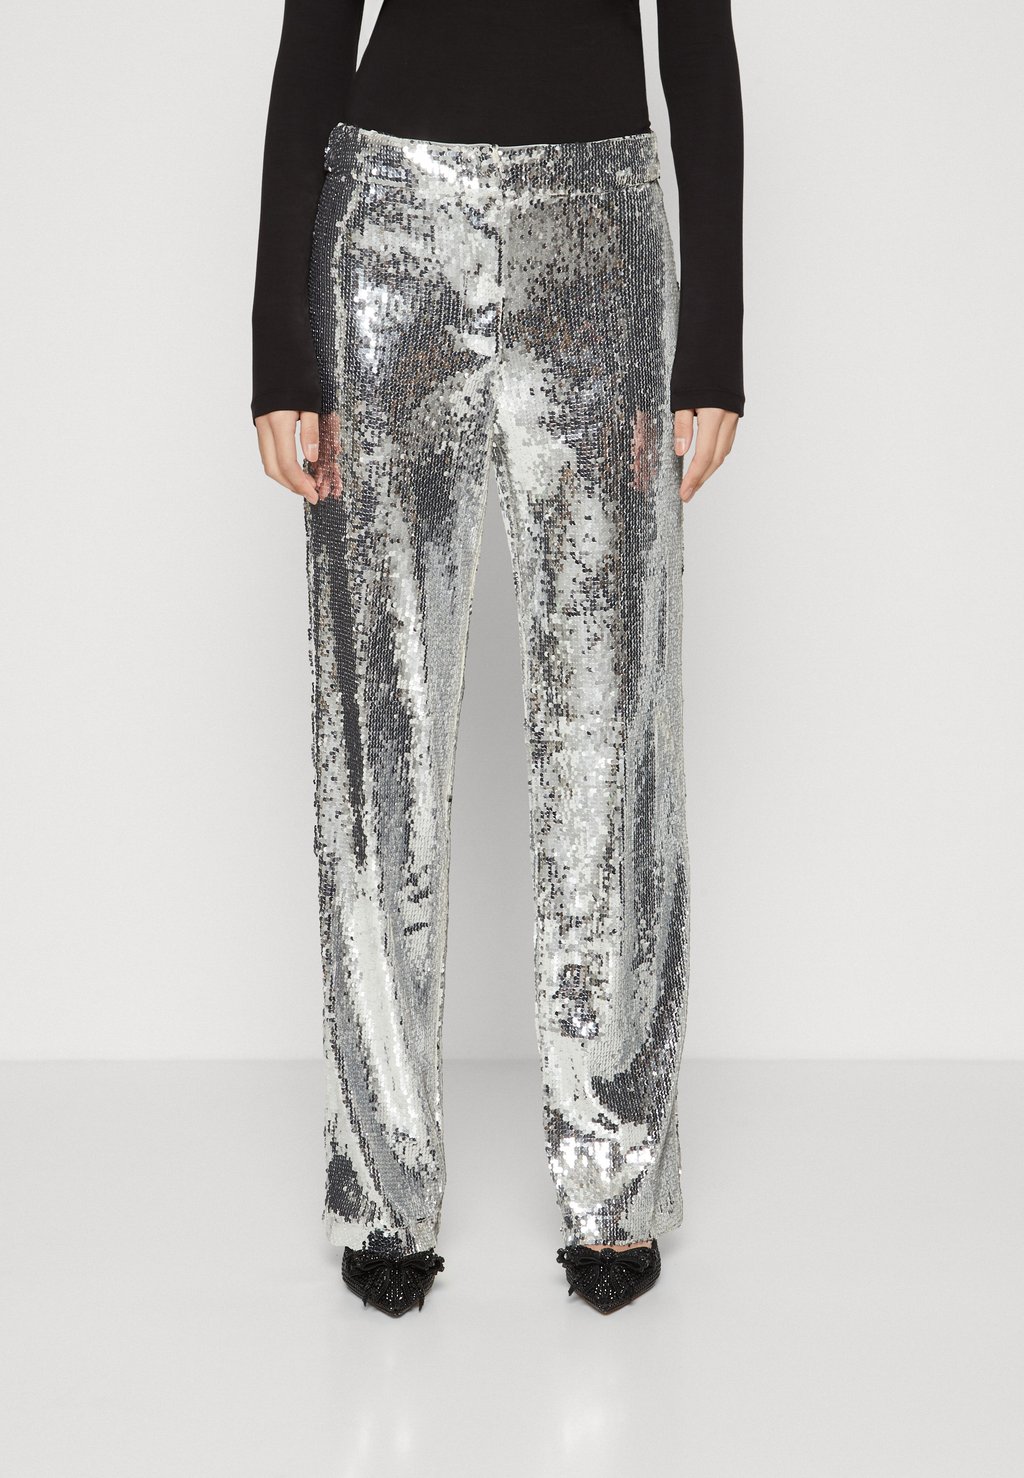 Брюки SILVER SEQUIN TROUSERS Gina Tricot, цвет silver колье gina reminder blue silver